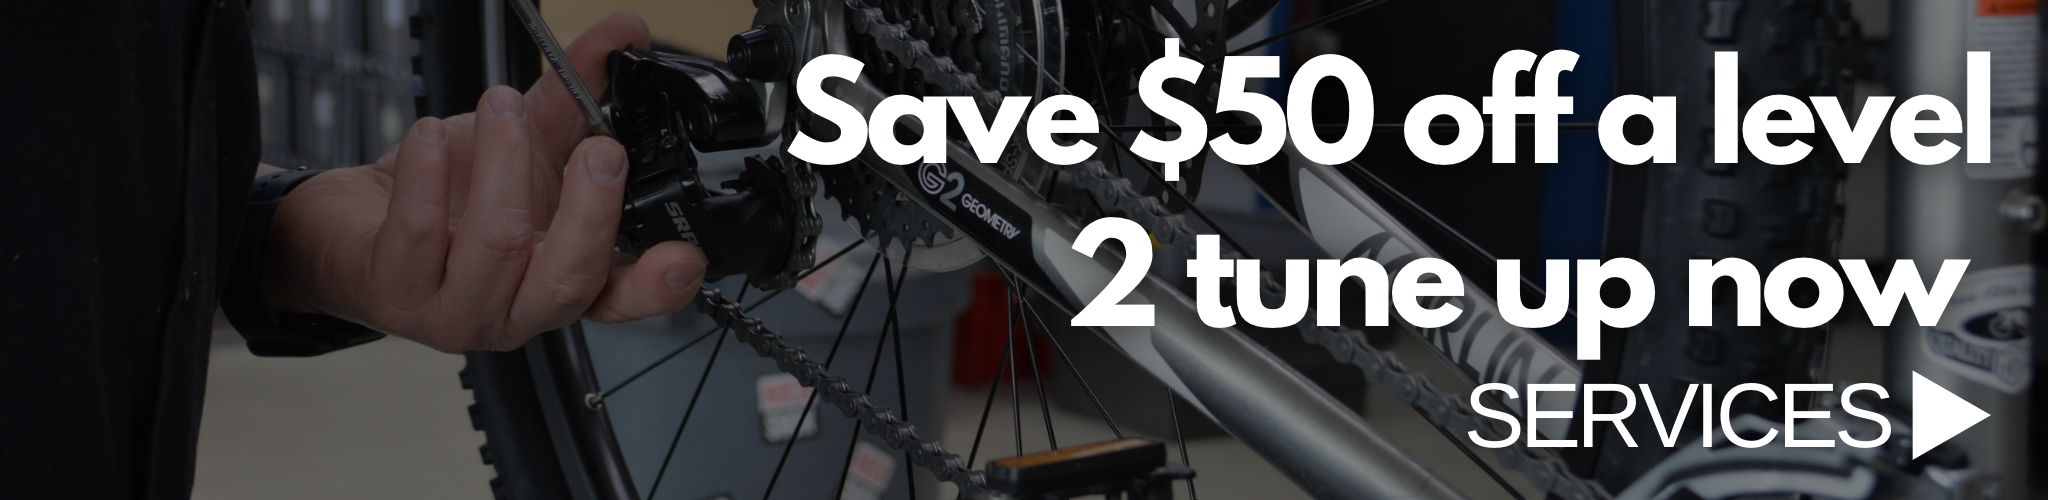 Save $50 off a level 2 tune up now | Services